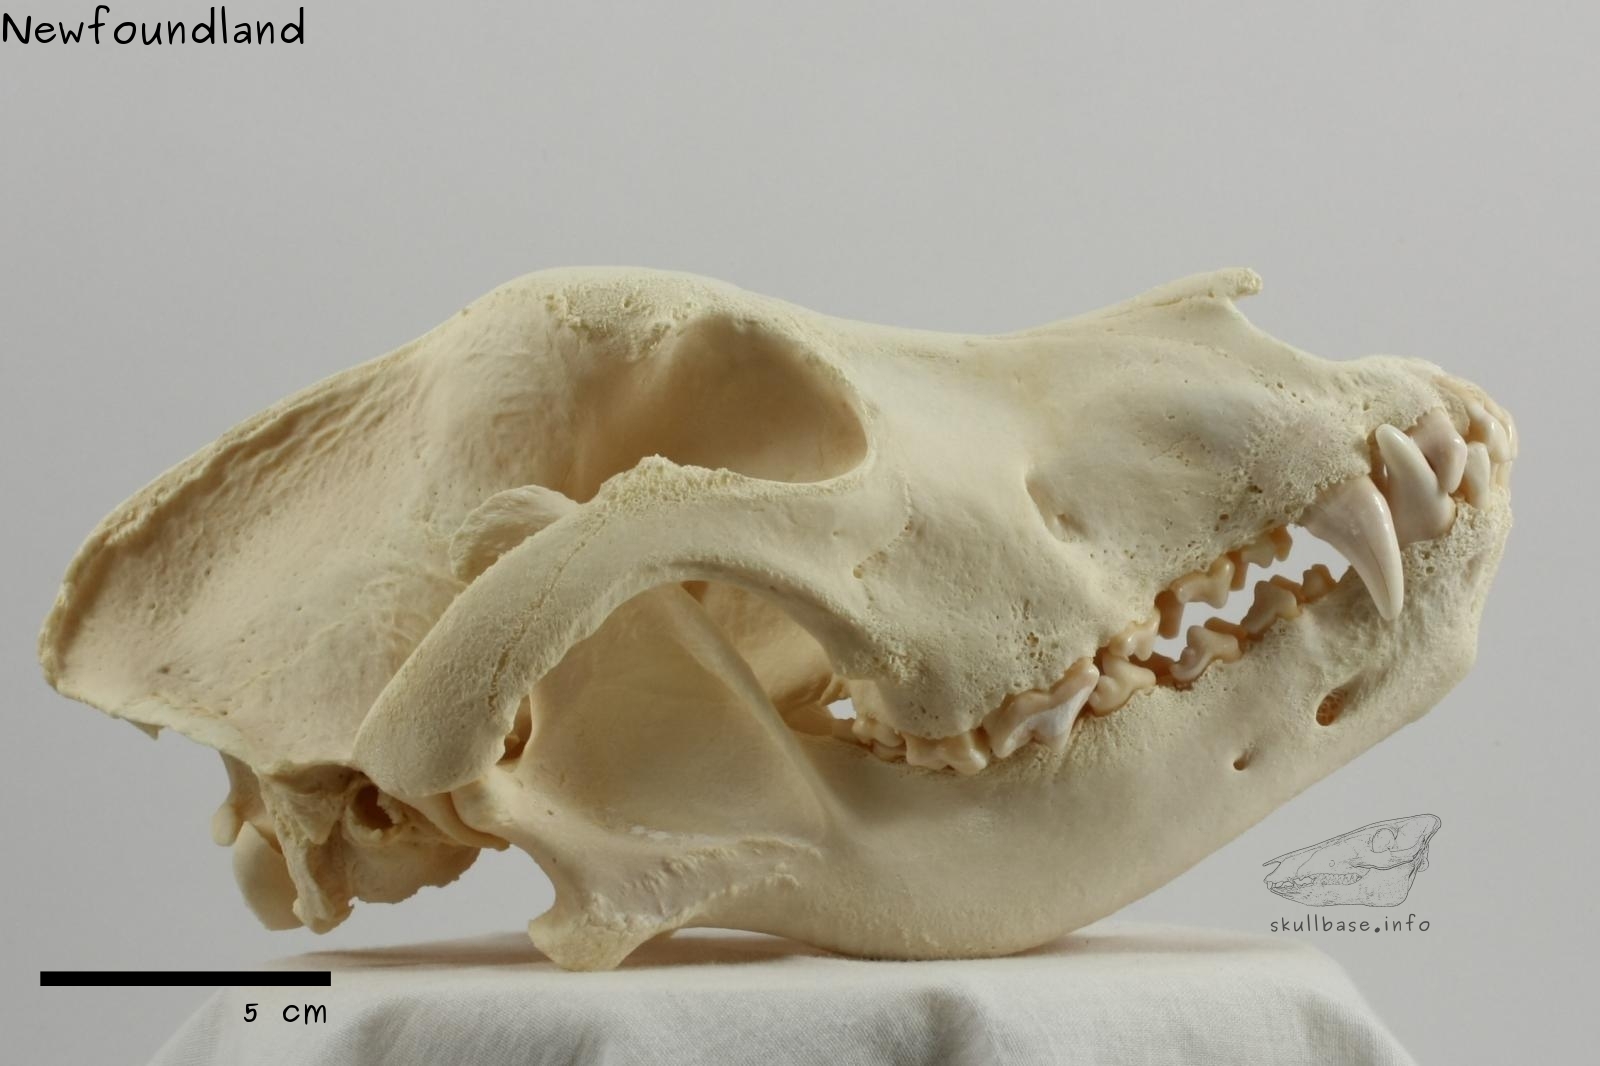 Newfoundland (Canis lupus familiaris) skull lateral view